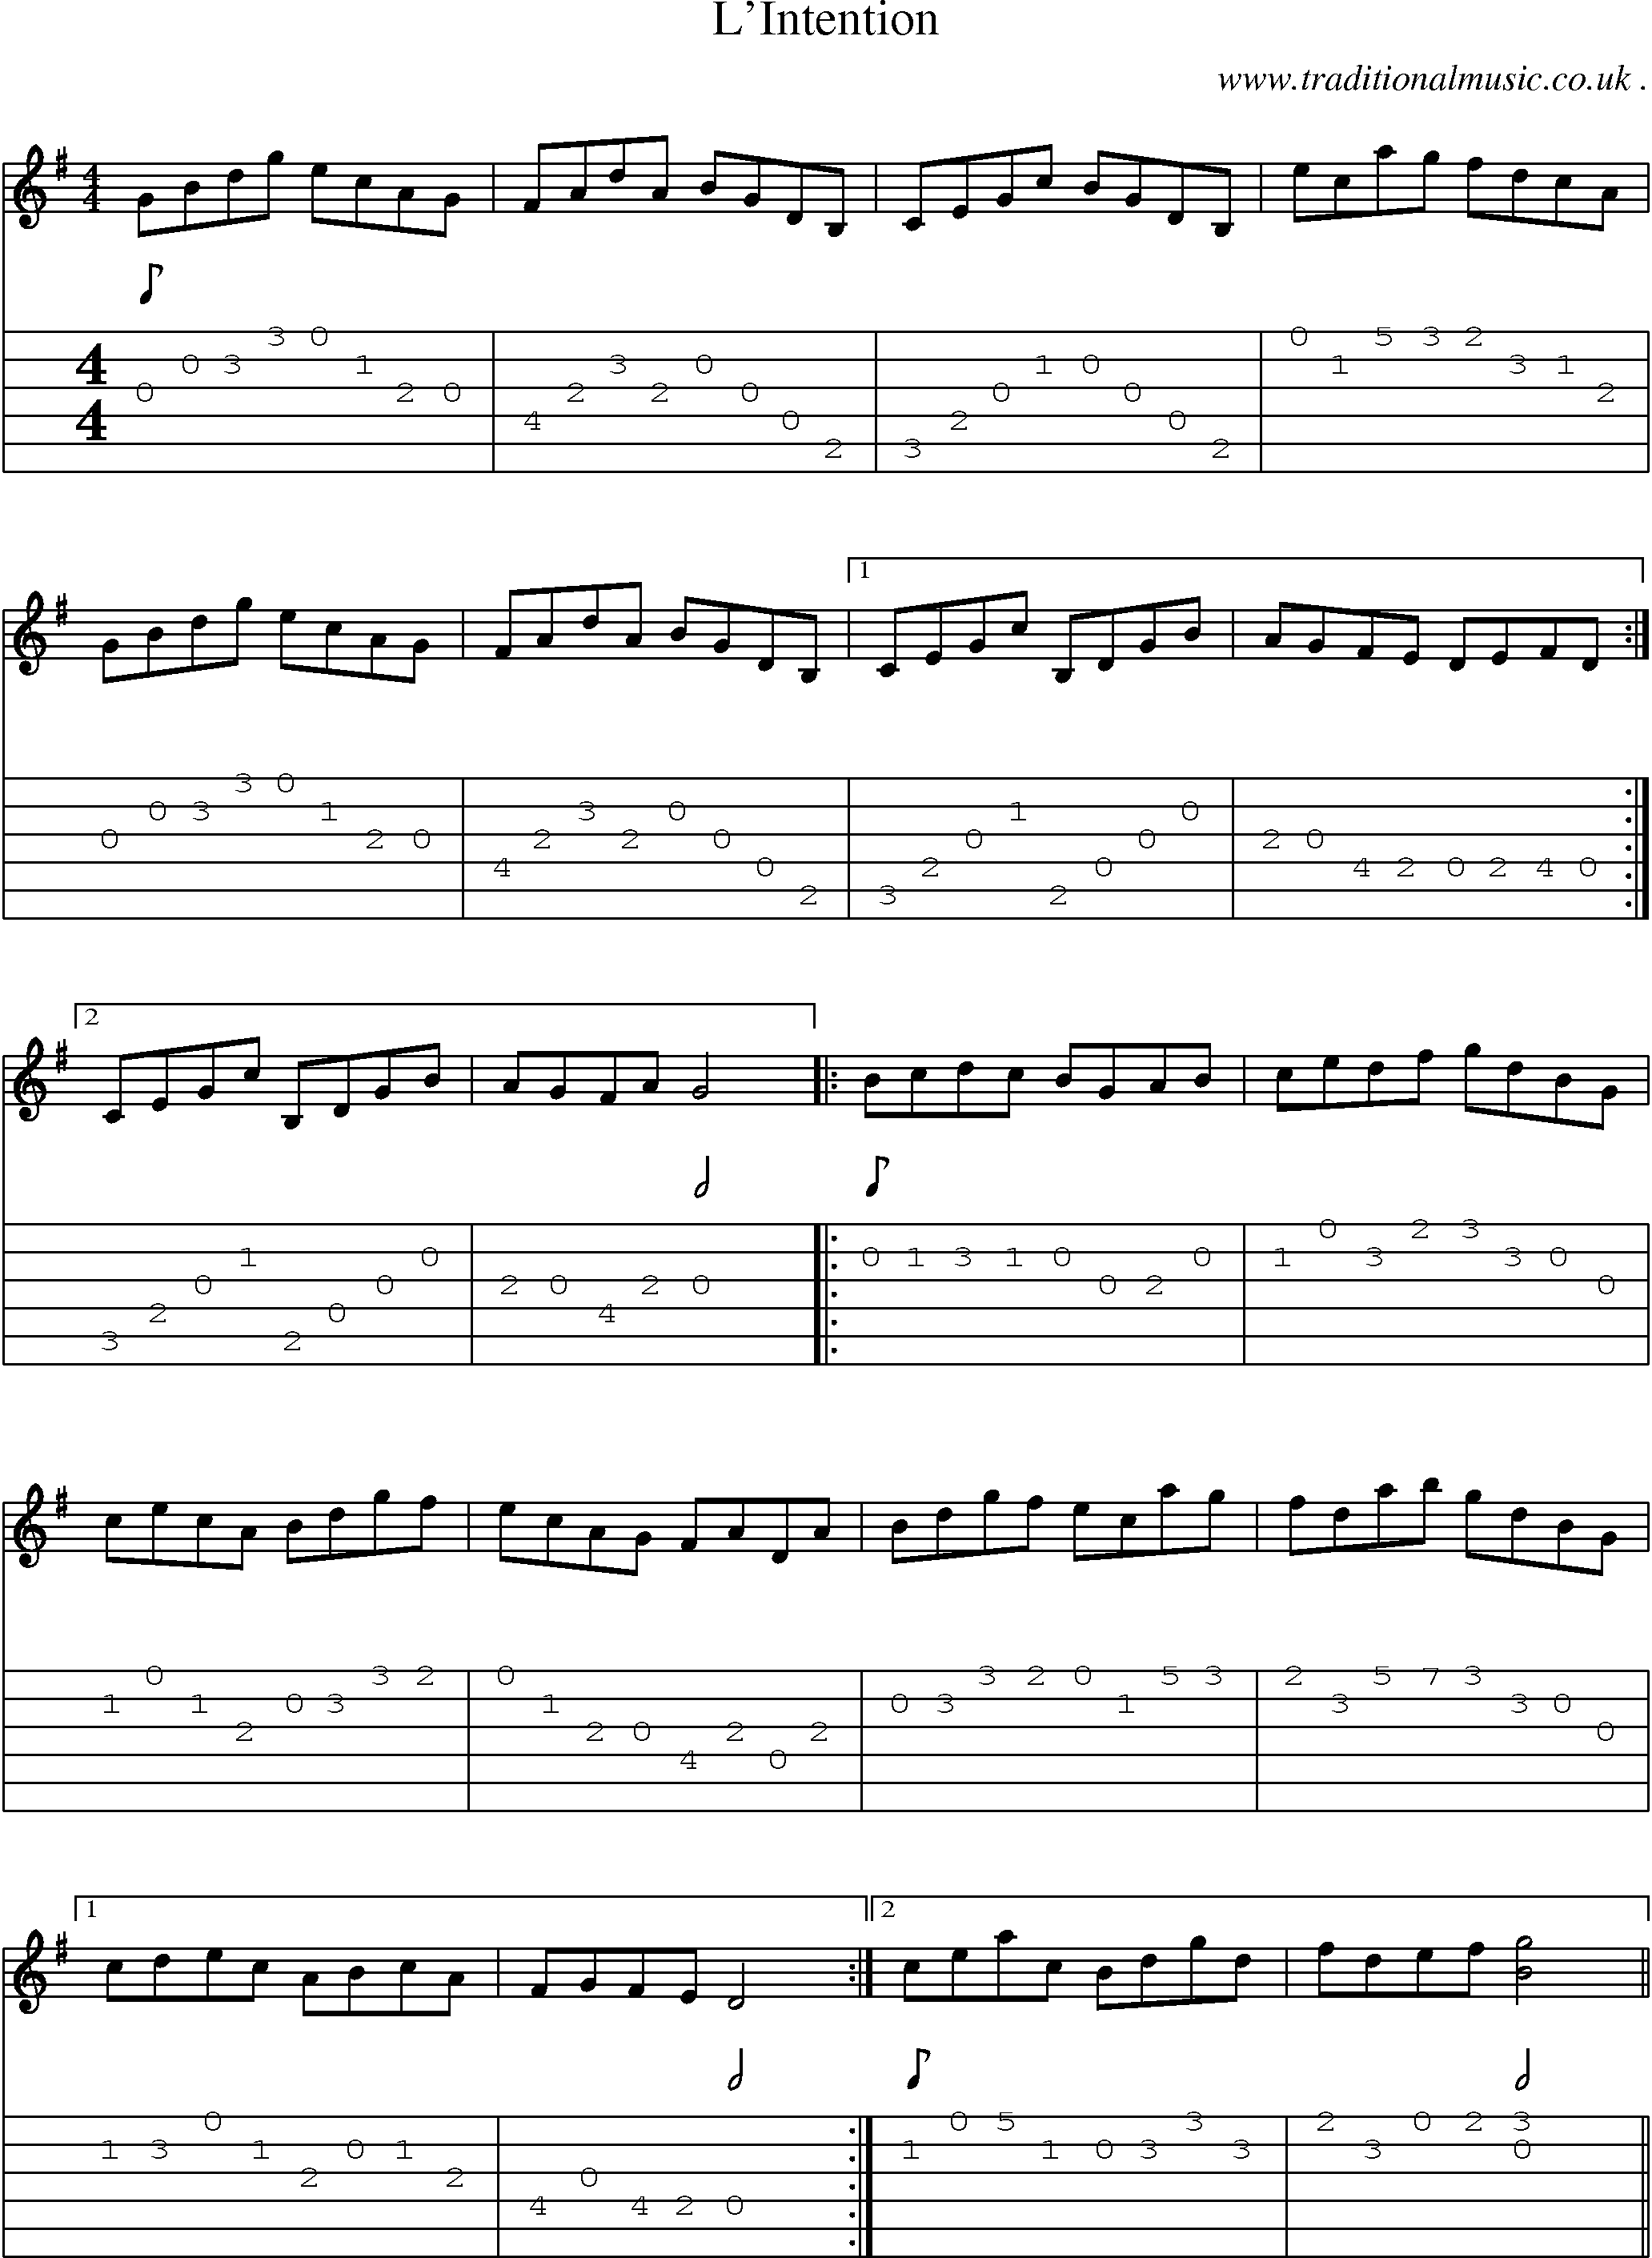 Sheet-Music and Guitar Tabs for Lintention